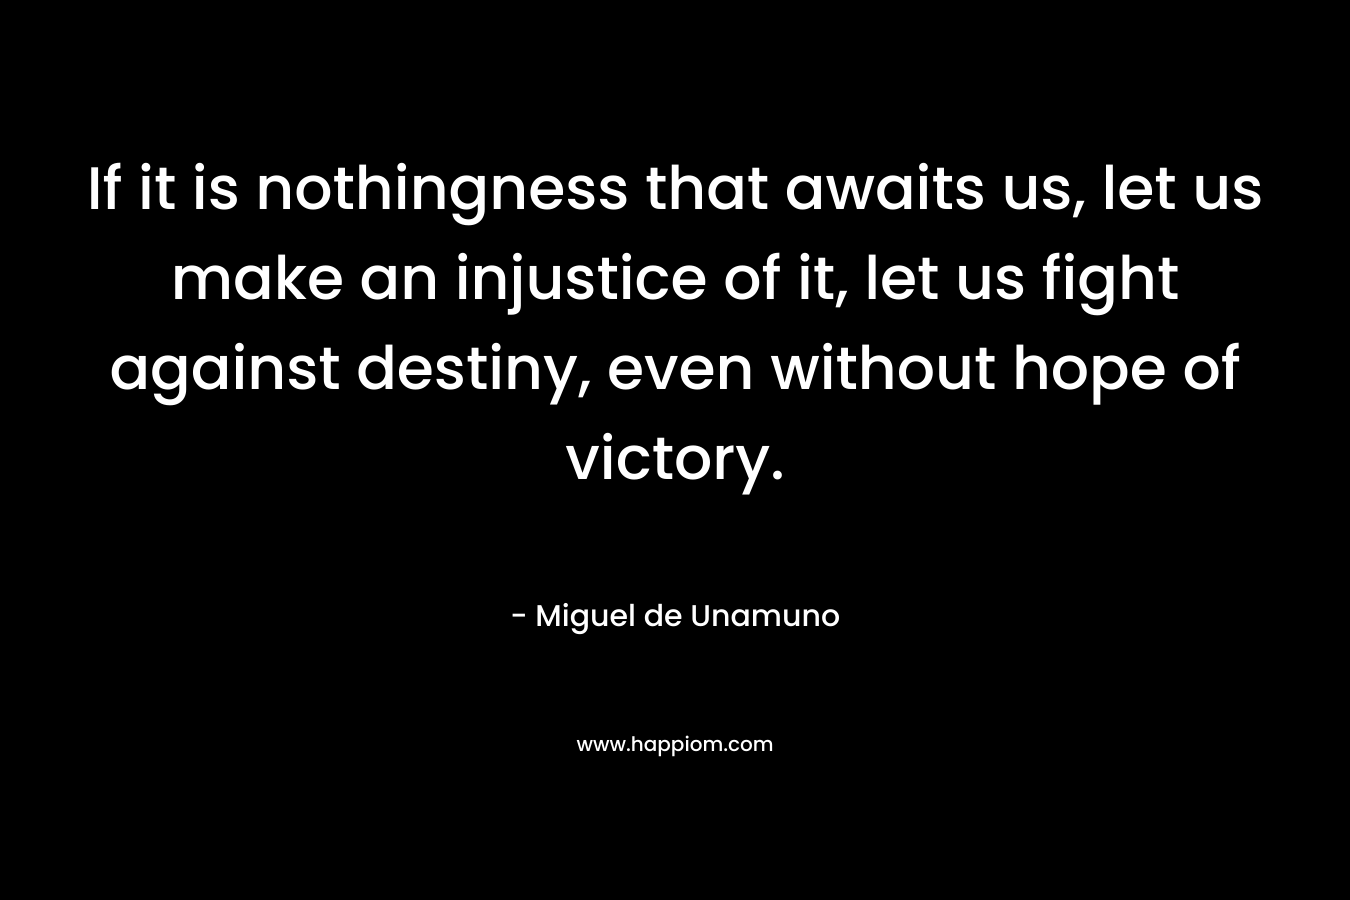 If it is nothingness that awaits us, let us make an injustice of it, let us fight against destiny, even without hope of victory. – Miguel de Unamuno